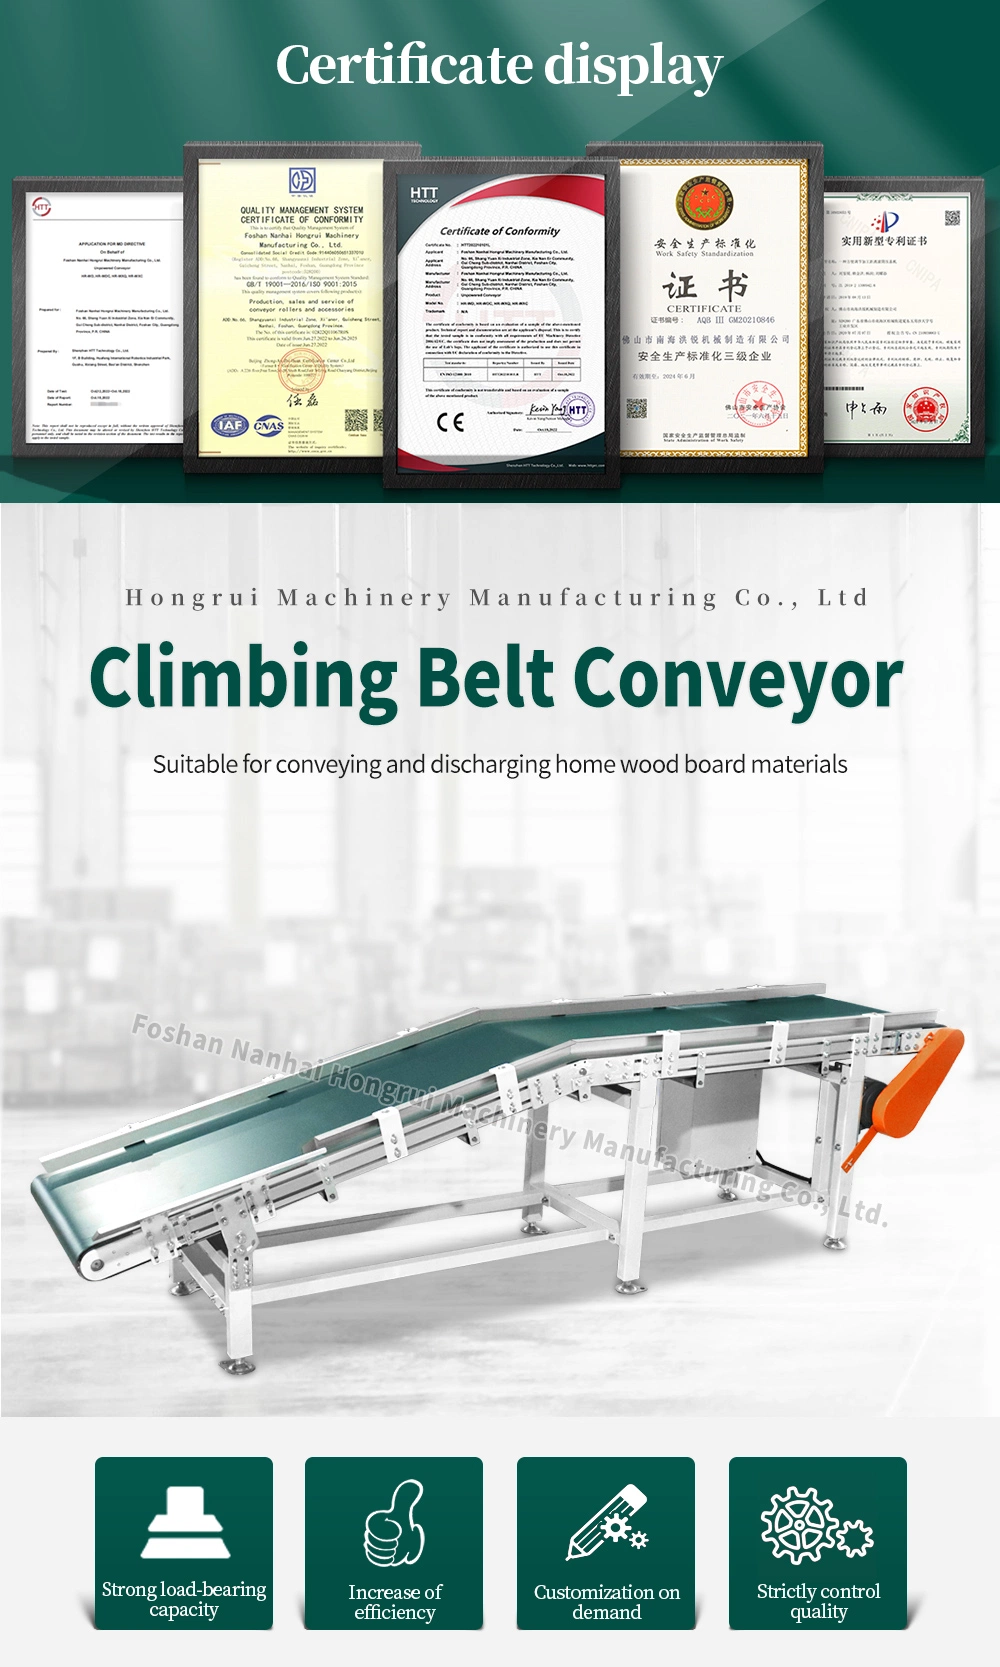 Efficient Industrial Conveyor Lift Automation Improved Material Handling with Conveyor Technology